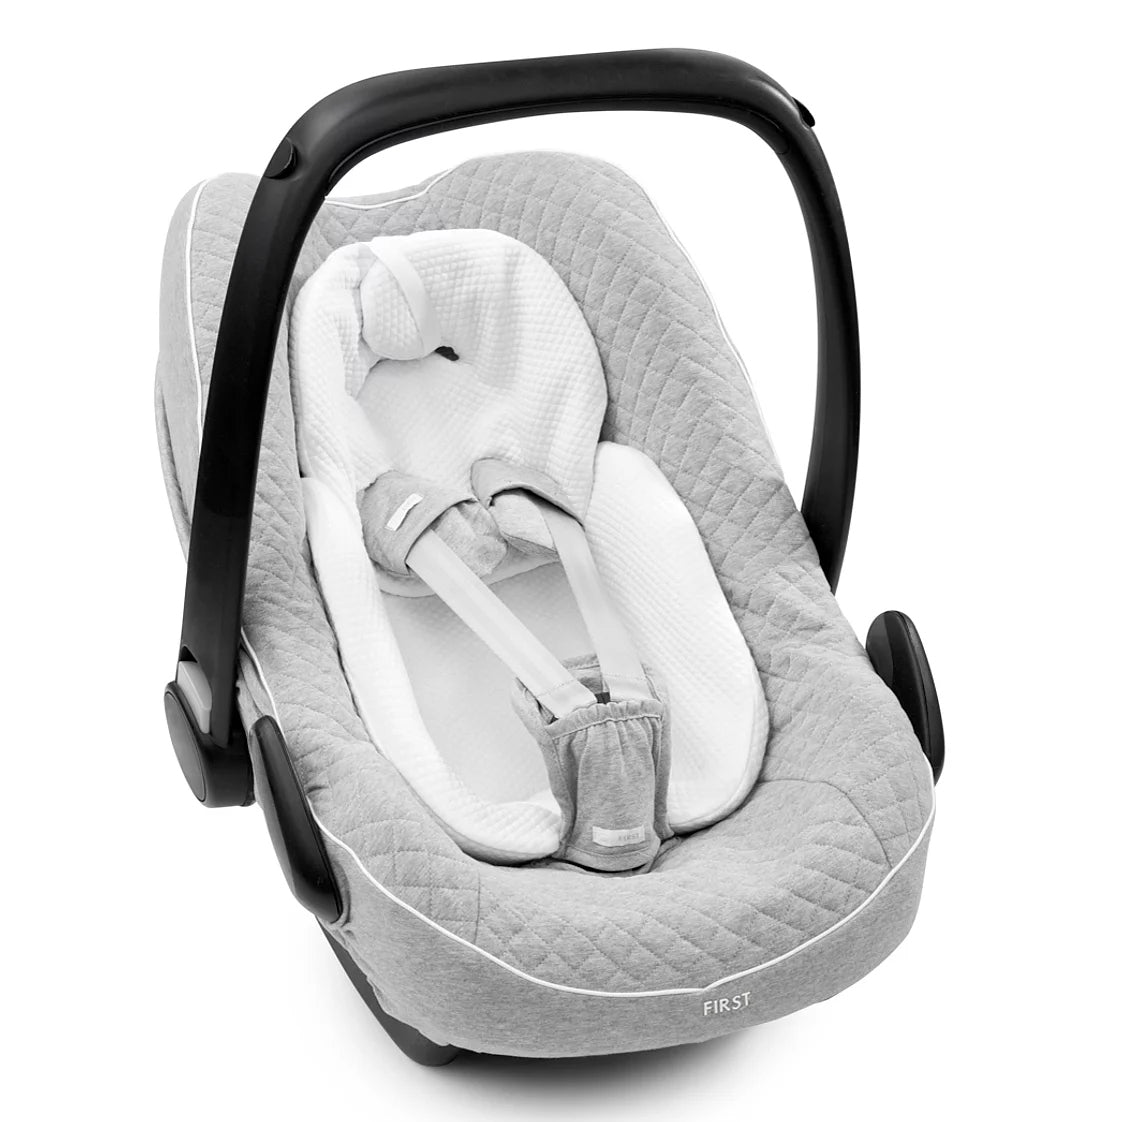 First Endless Grey Cover for Maxicosi Car Seat - Pebble Pro